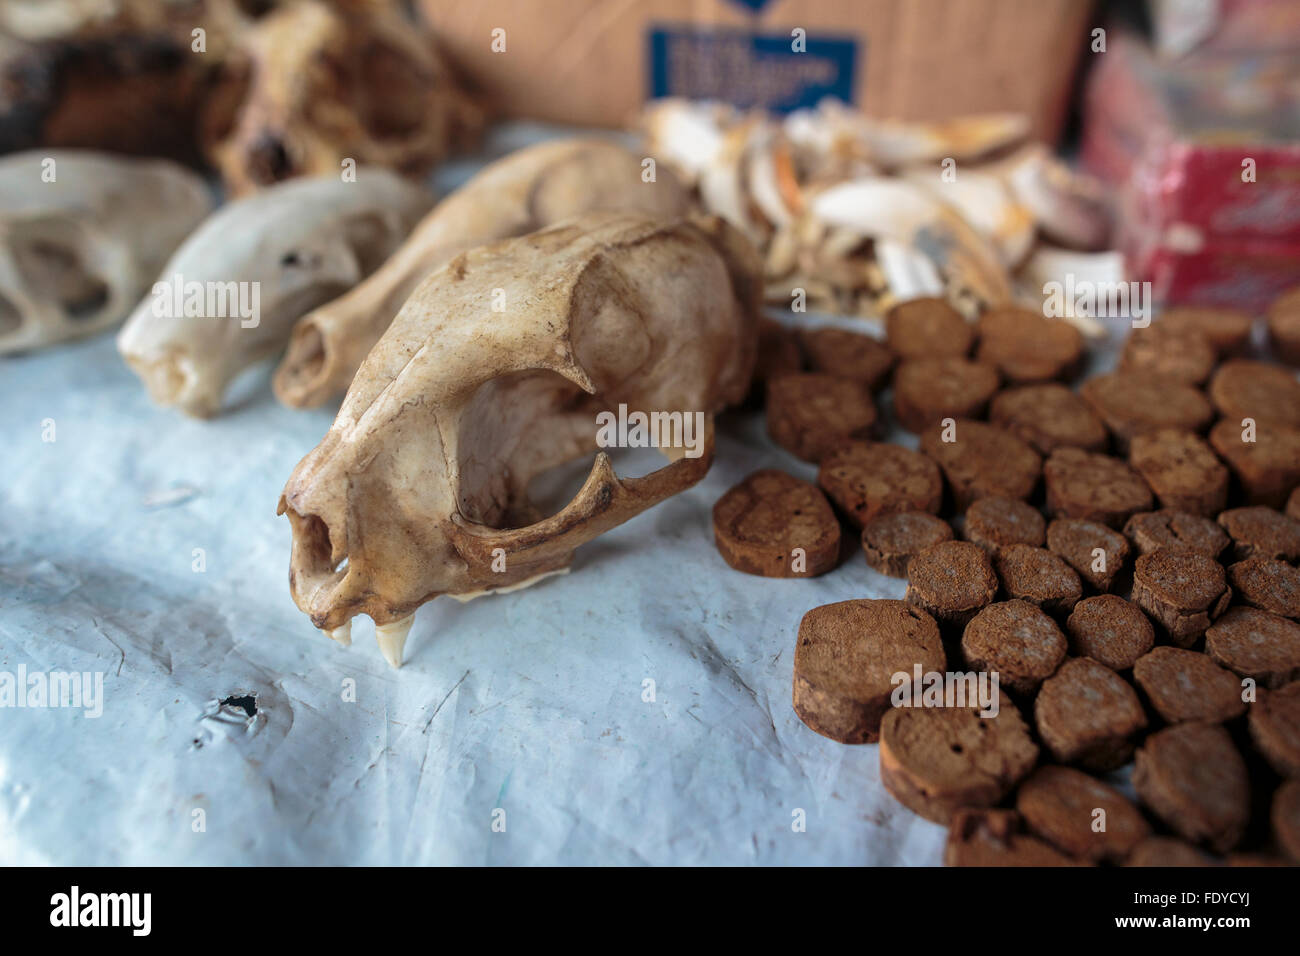 Monkey skulls Crocodile Scales and cross section pieces of Ayahuasca vine, or Banisteriopsis Caapi, for sale at Belen Market Stock Photo